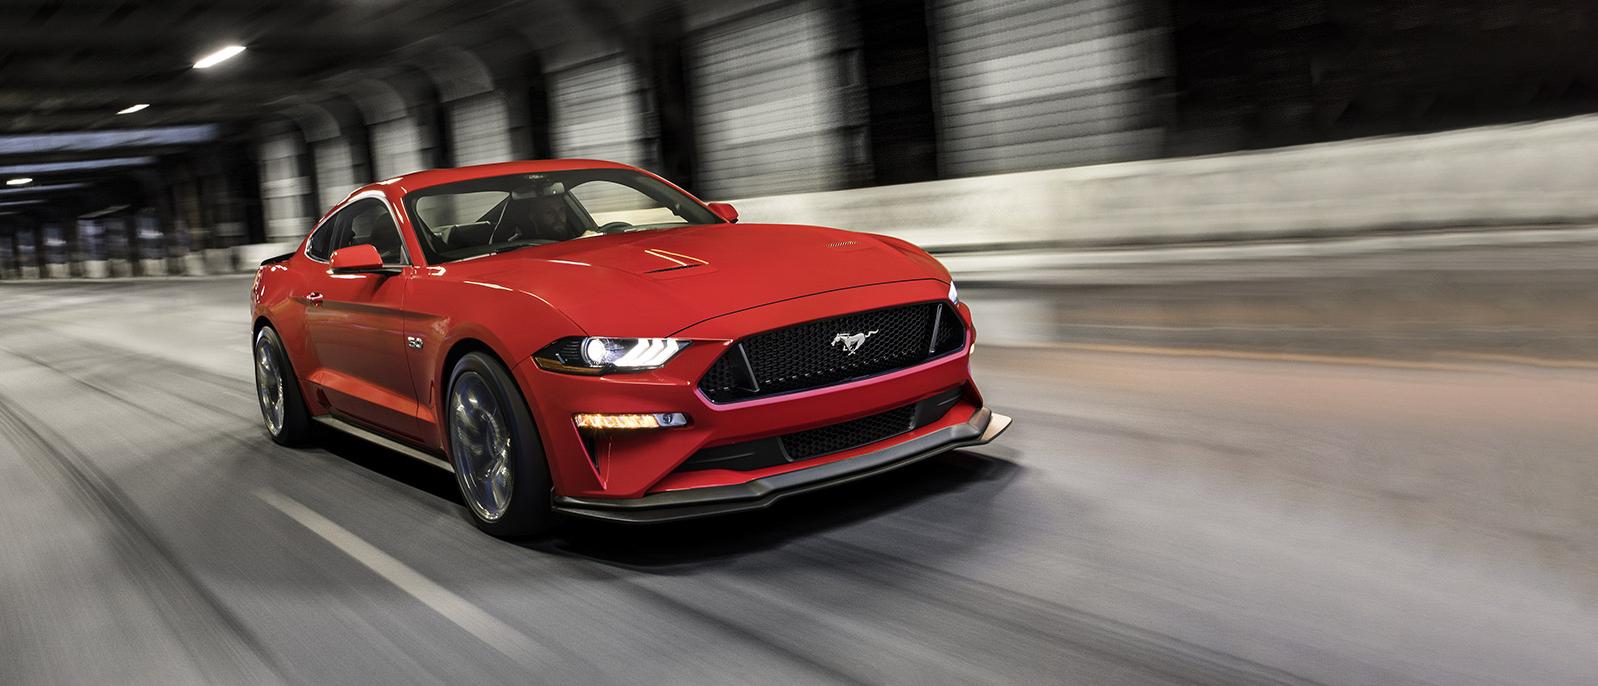 2020 Ford Mustang driving through a tunnel